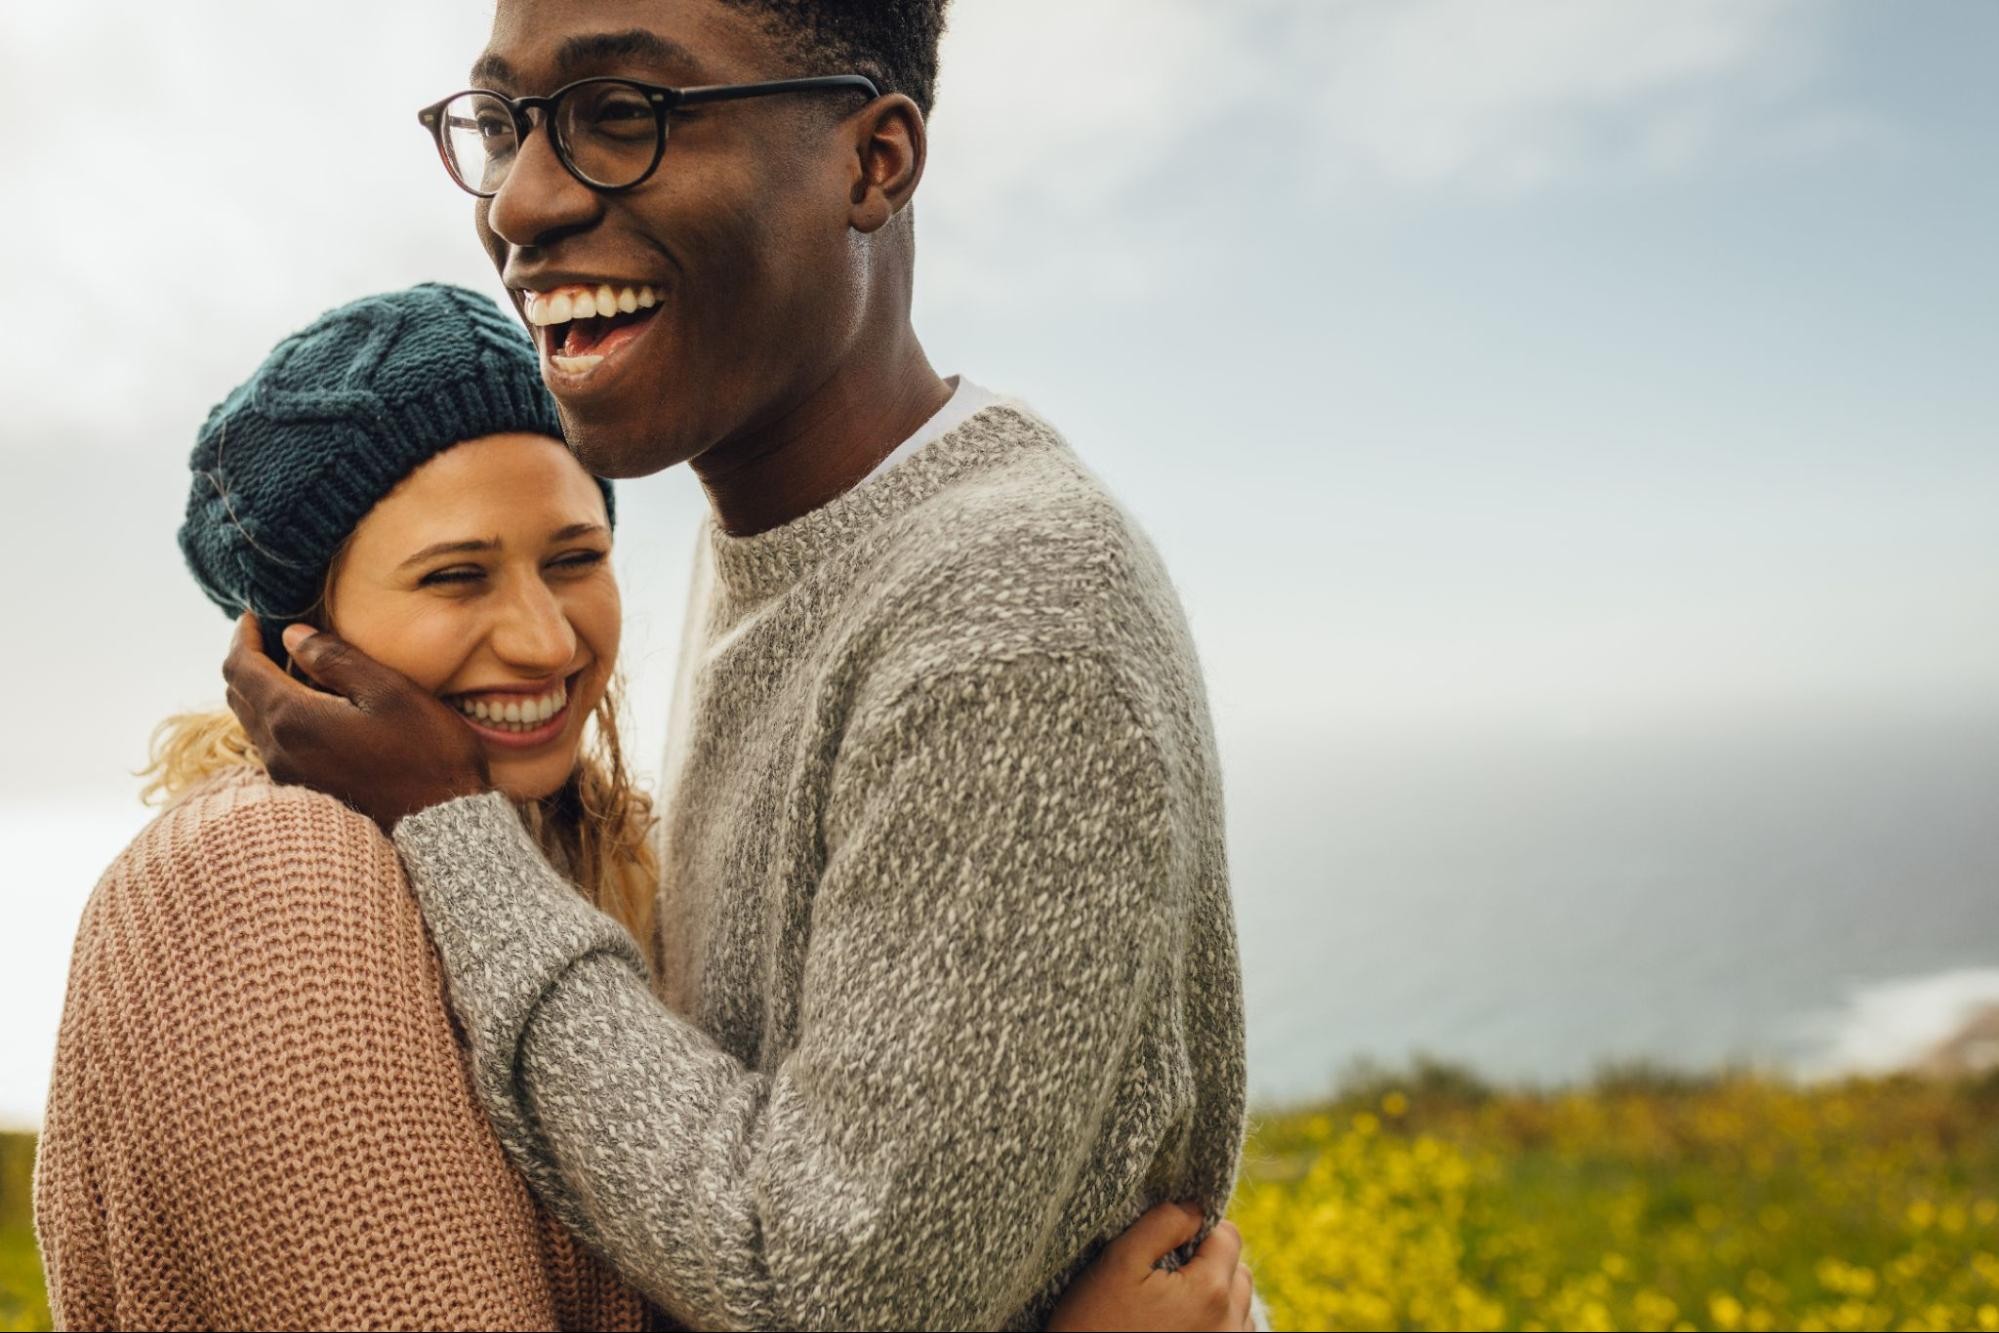 Best 10 Interracial Dating Sites To Find Love in 2021